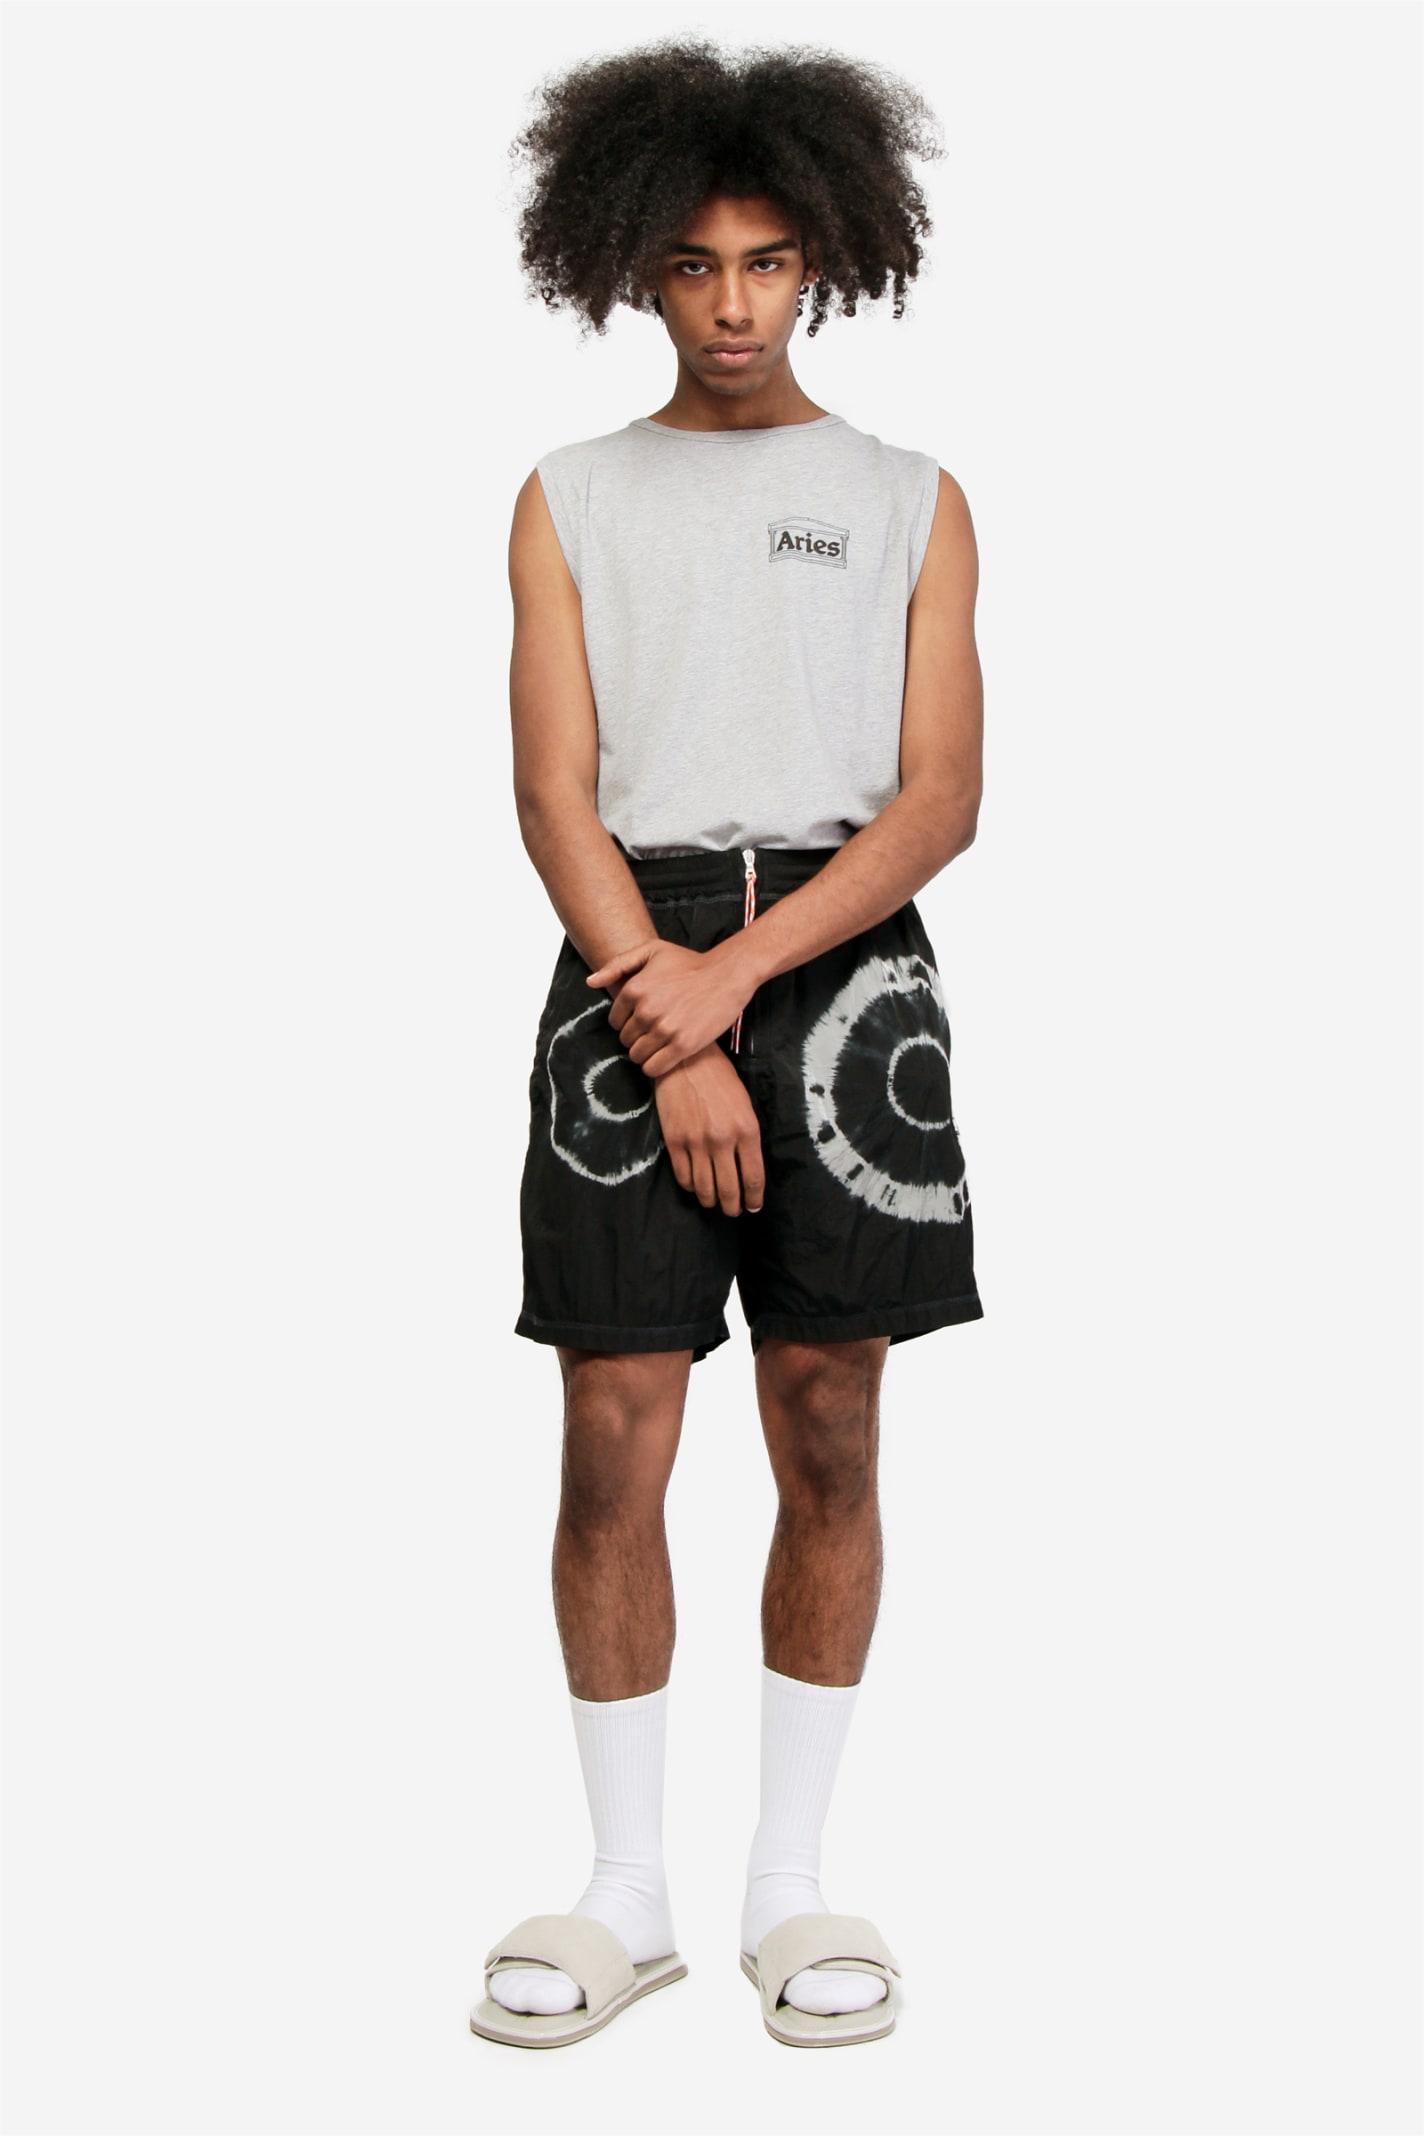 Aries Low Armhole Muscle T-shirt